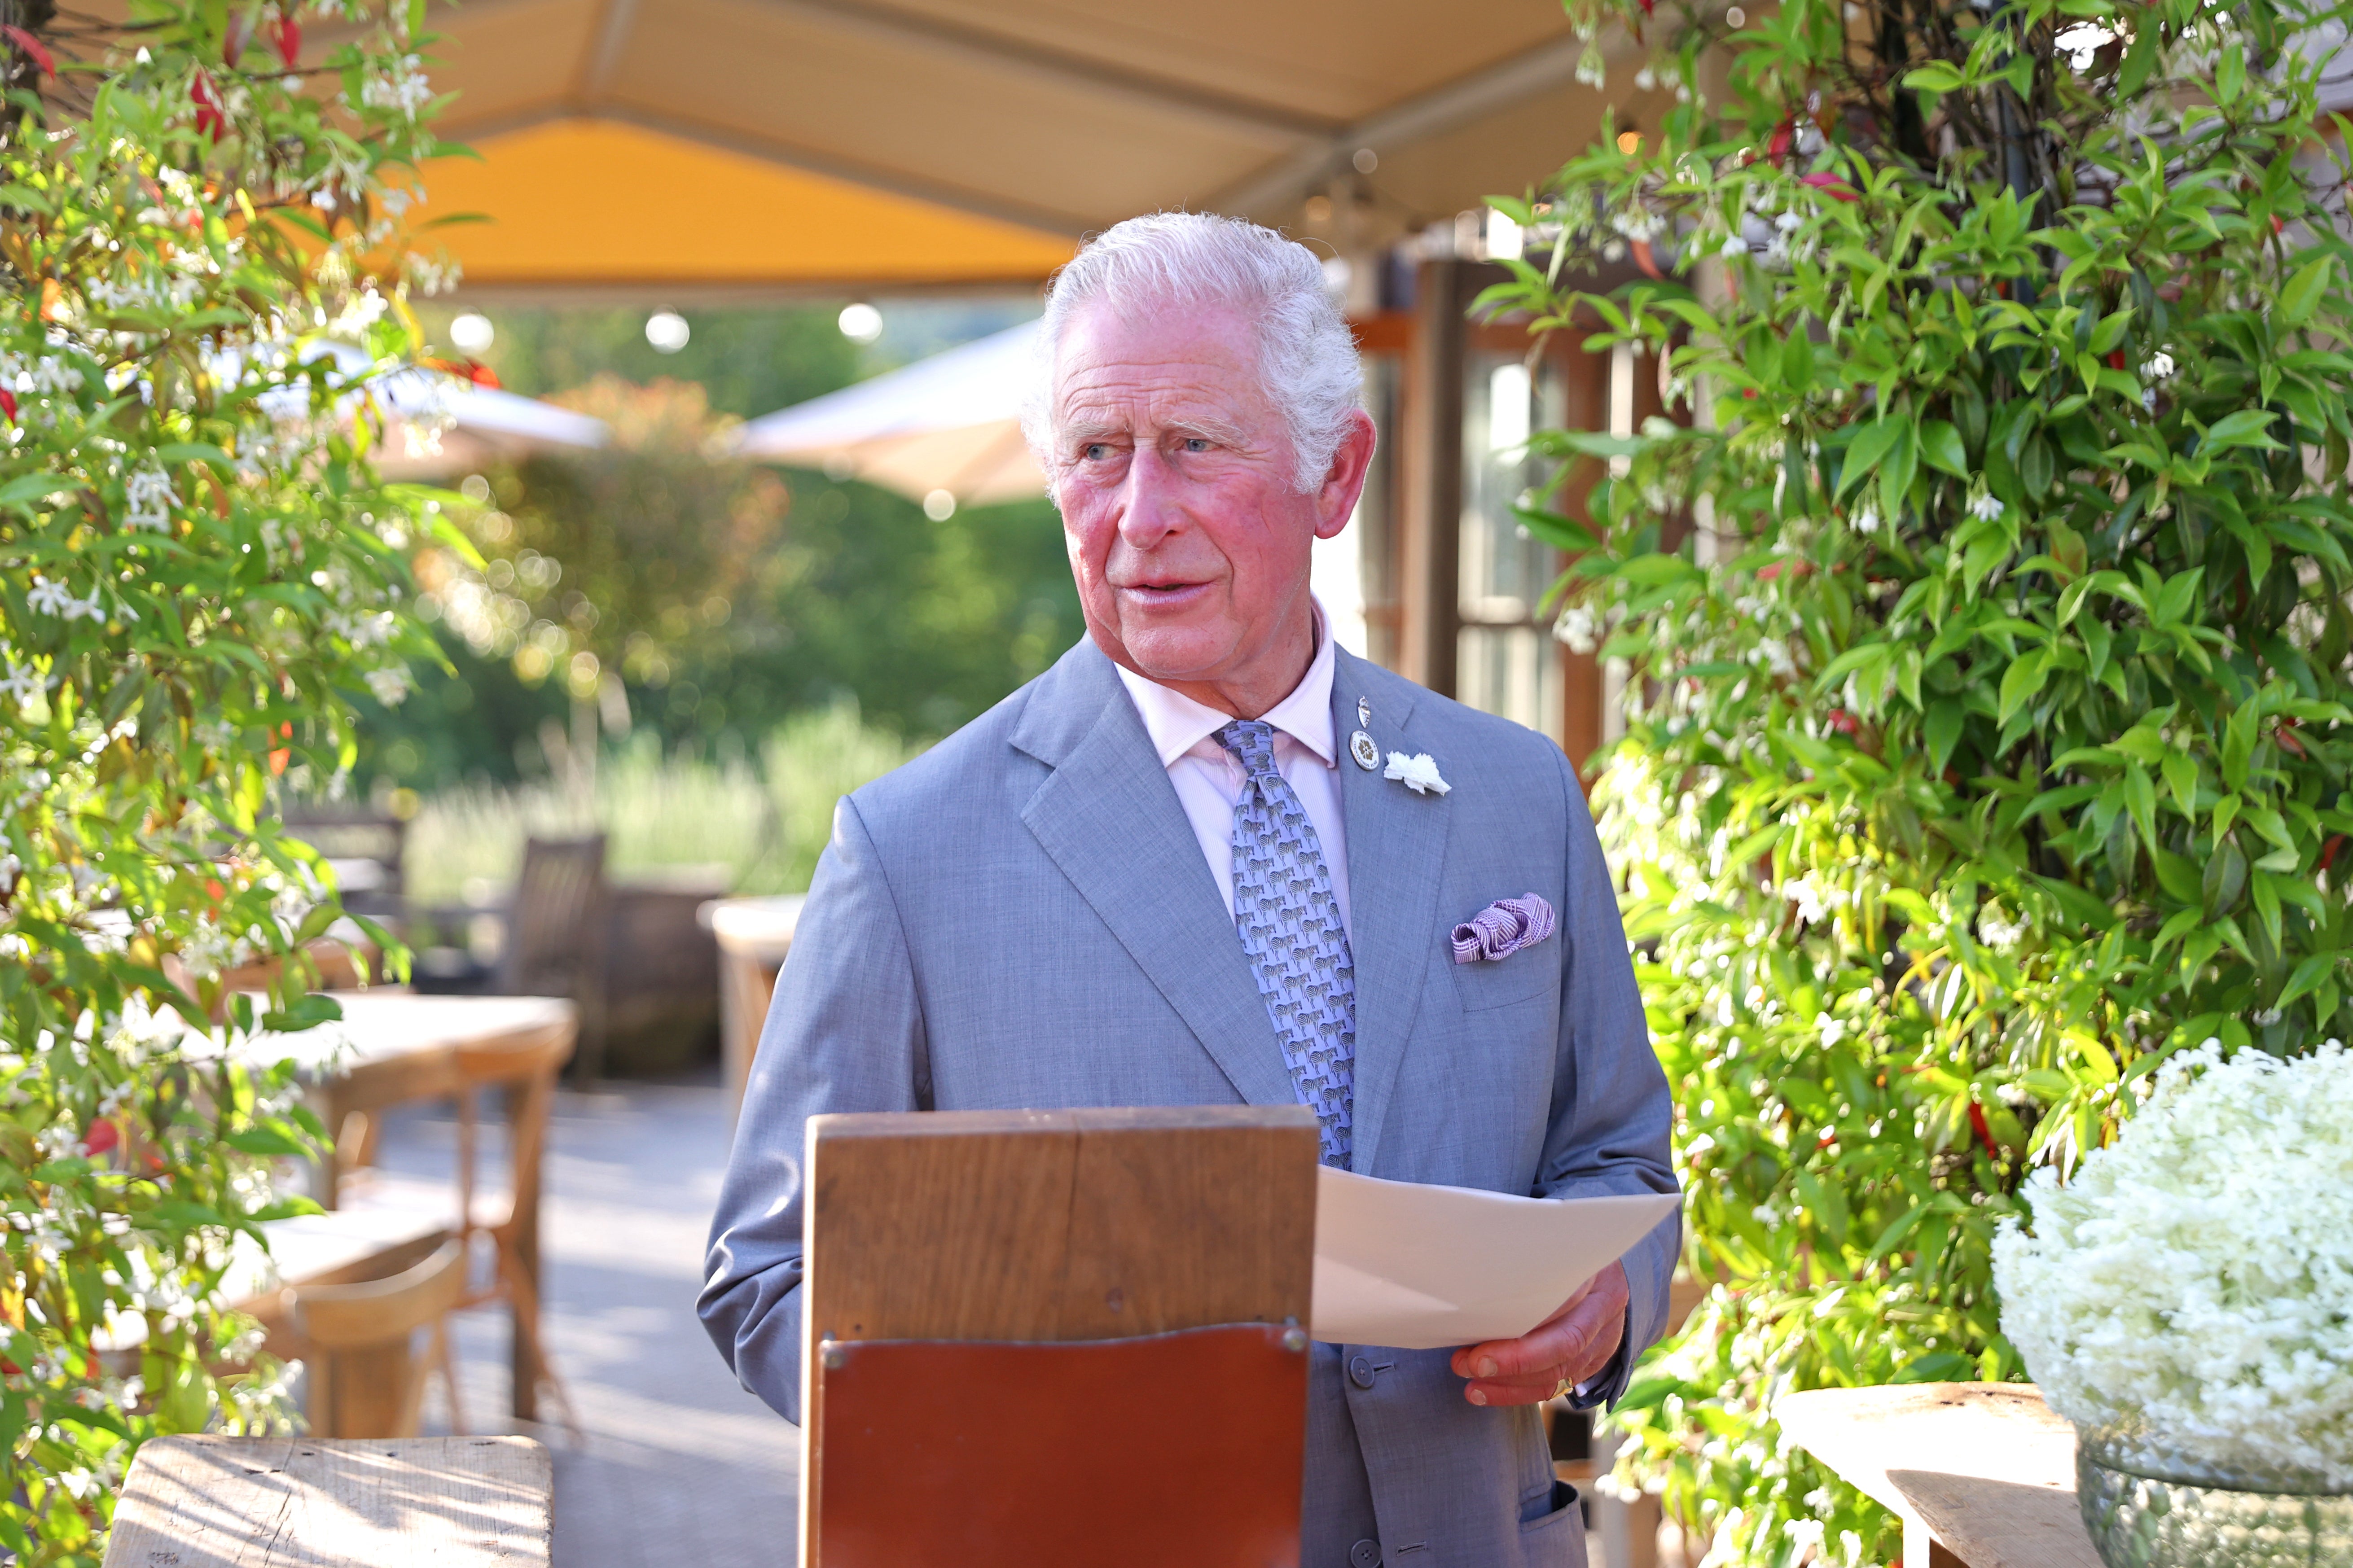 The Prince of Wales makes a speech during a reception at the Duchy of Cornwall Nursery in Lostwithiel, Cornwall (Chris Jackson/PA)